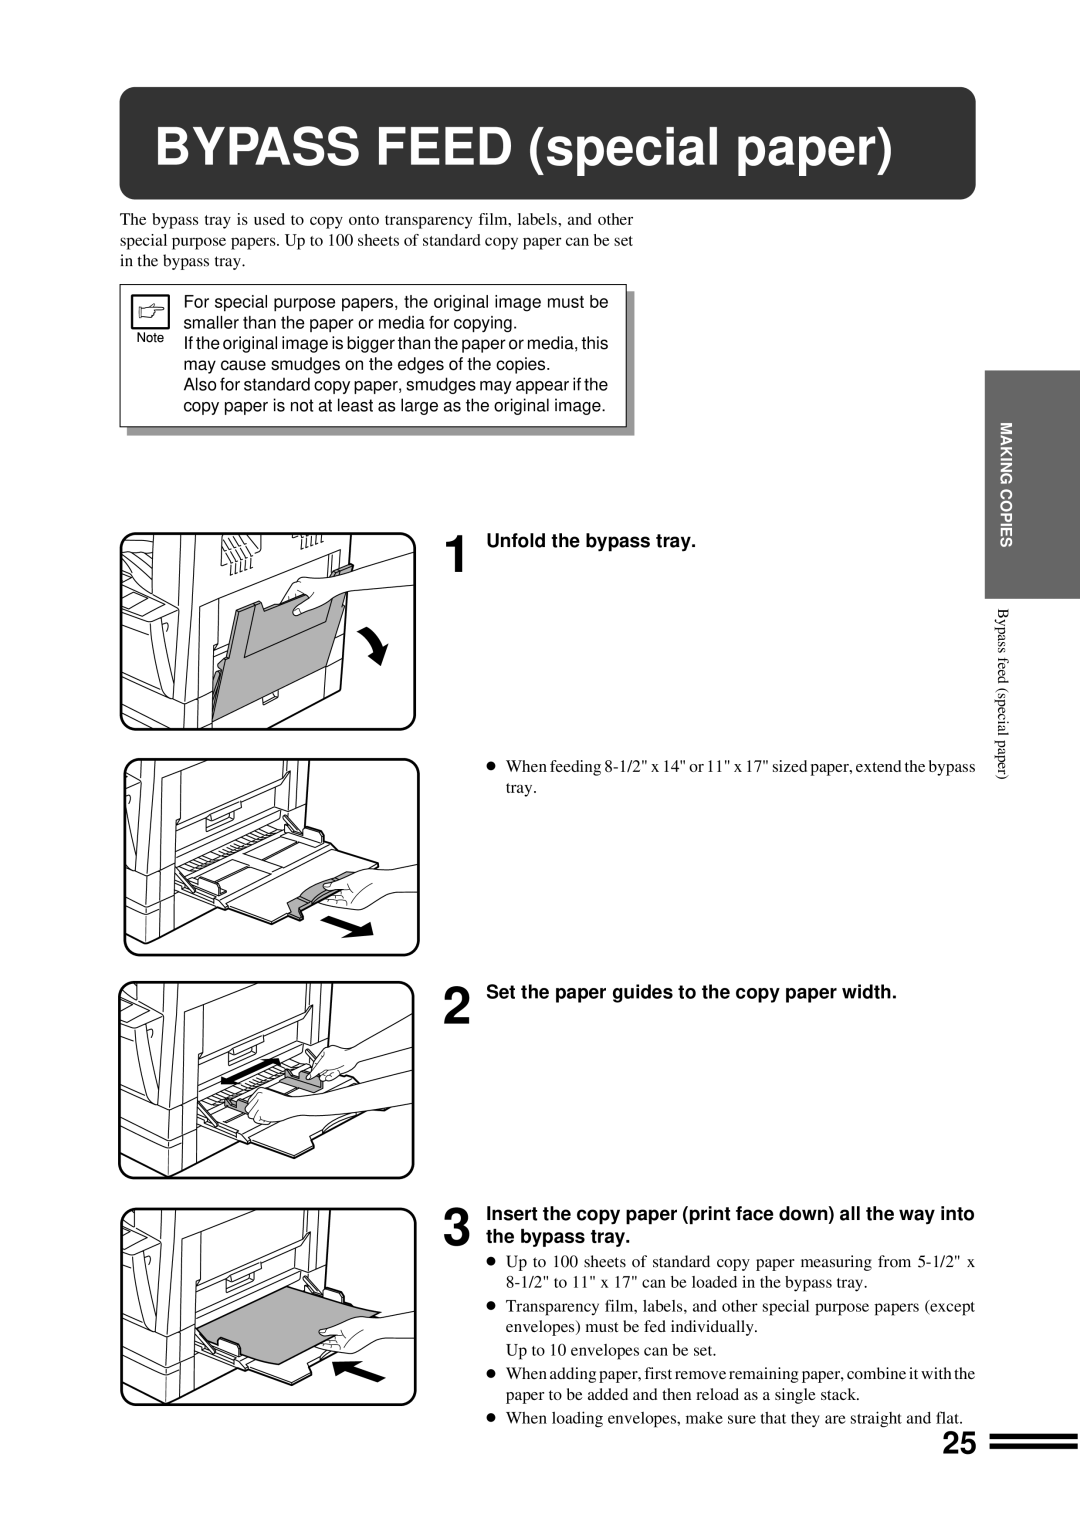 Sharp AR-207 BYPASS FEED special paper, Unfold the bypass tray, Set the paper guides to the copy paper width 